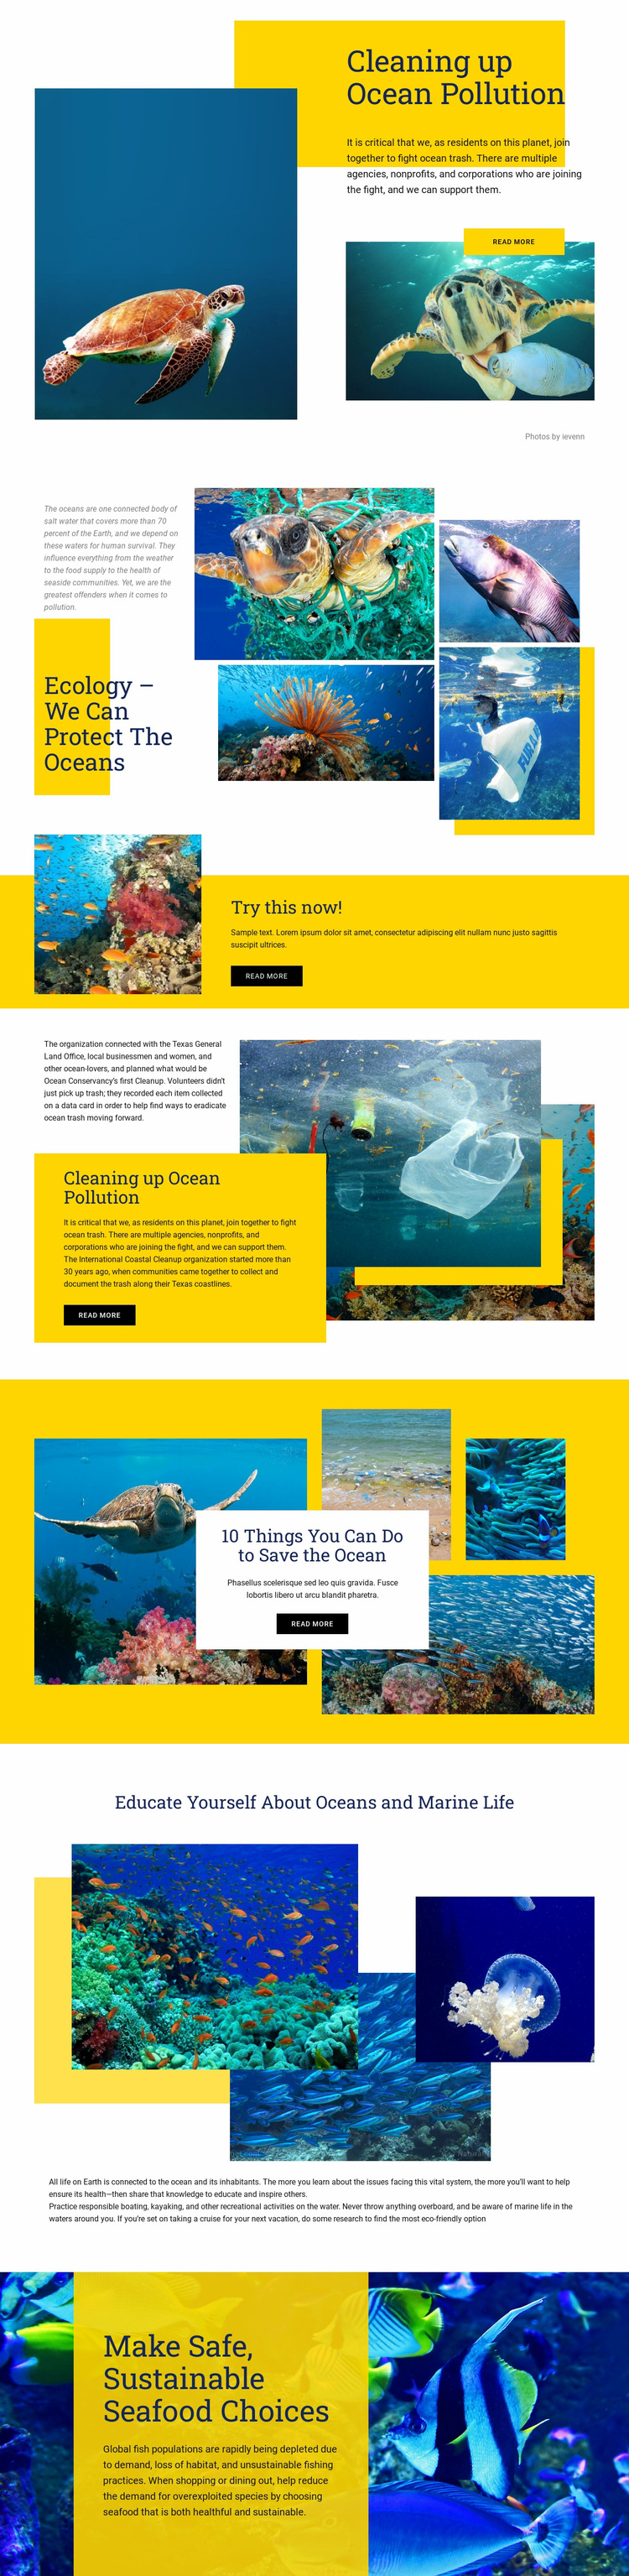 Protect The Oceans Website Design